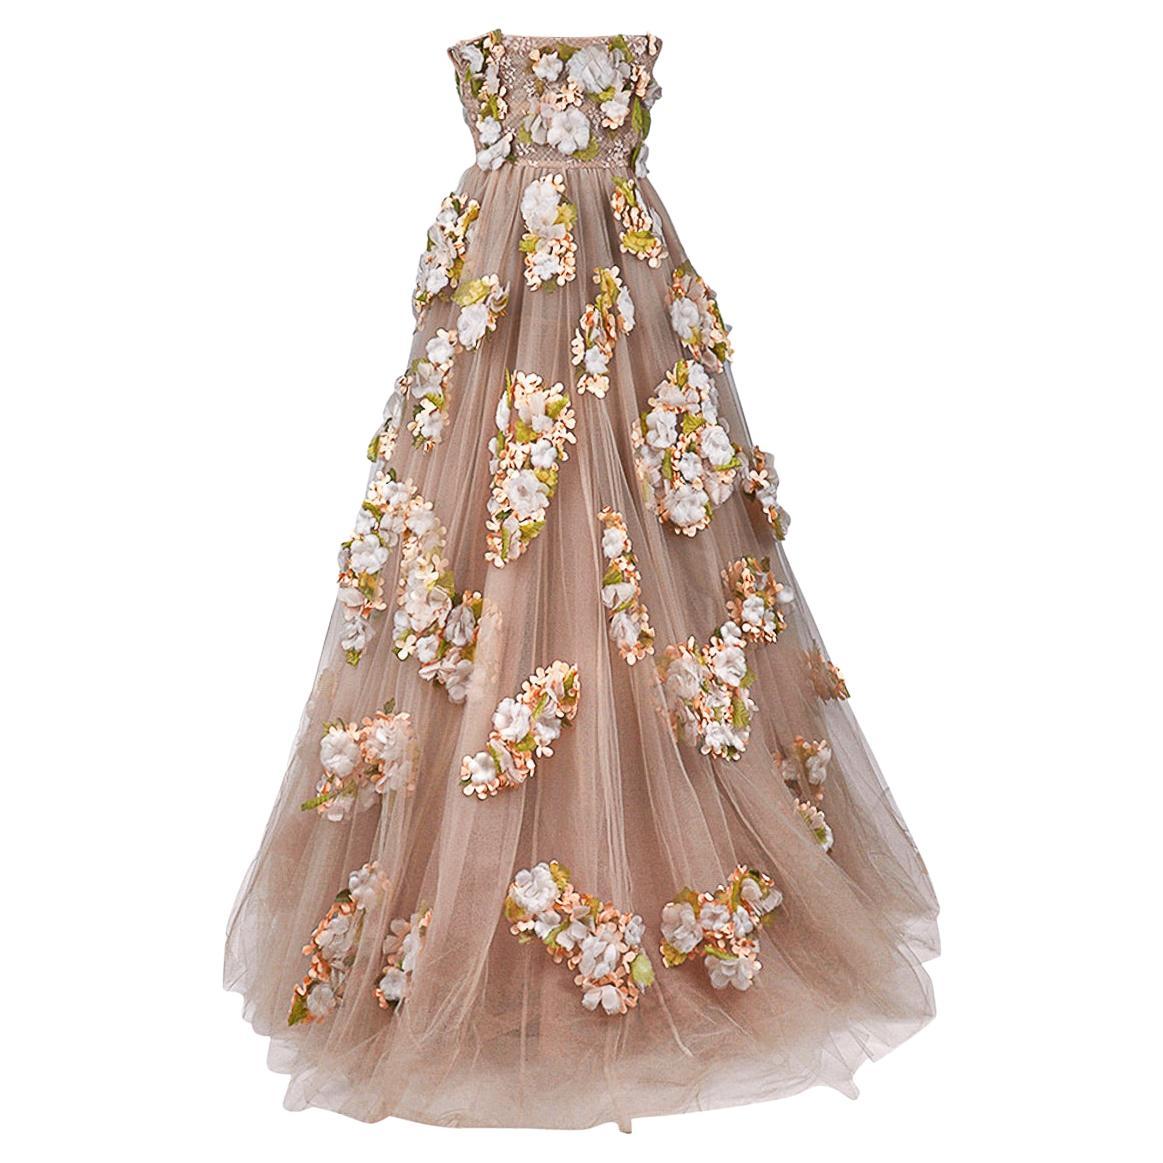 limited edition Valentino gown featured in nude tulle adorned with silk flowers.
Only 1 of 2 in the world created.
Strapless with the bodice of the empire waist covered in a fine lace.
This exquisite gown was worn one time and is a timeless